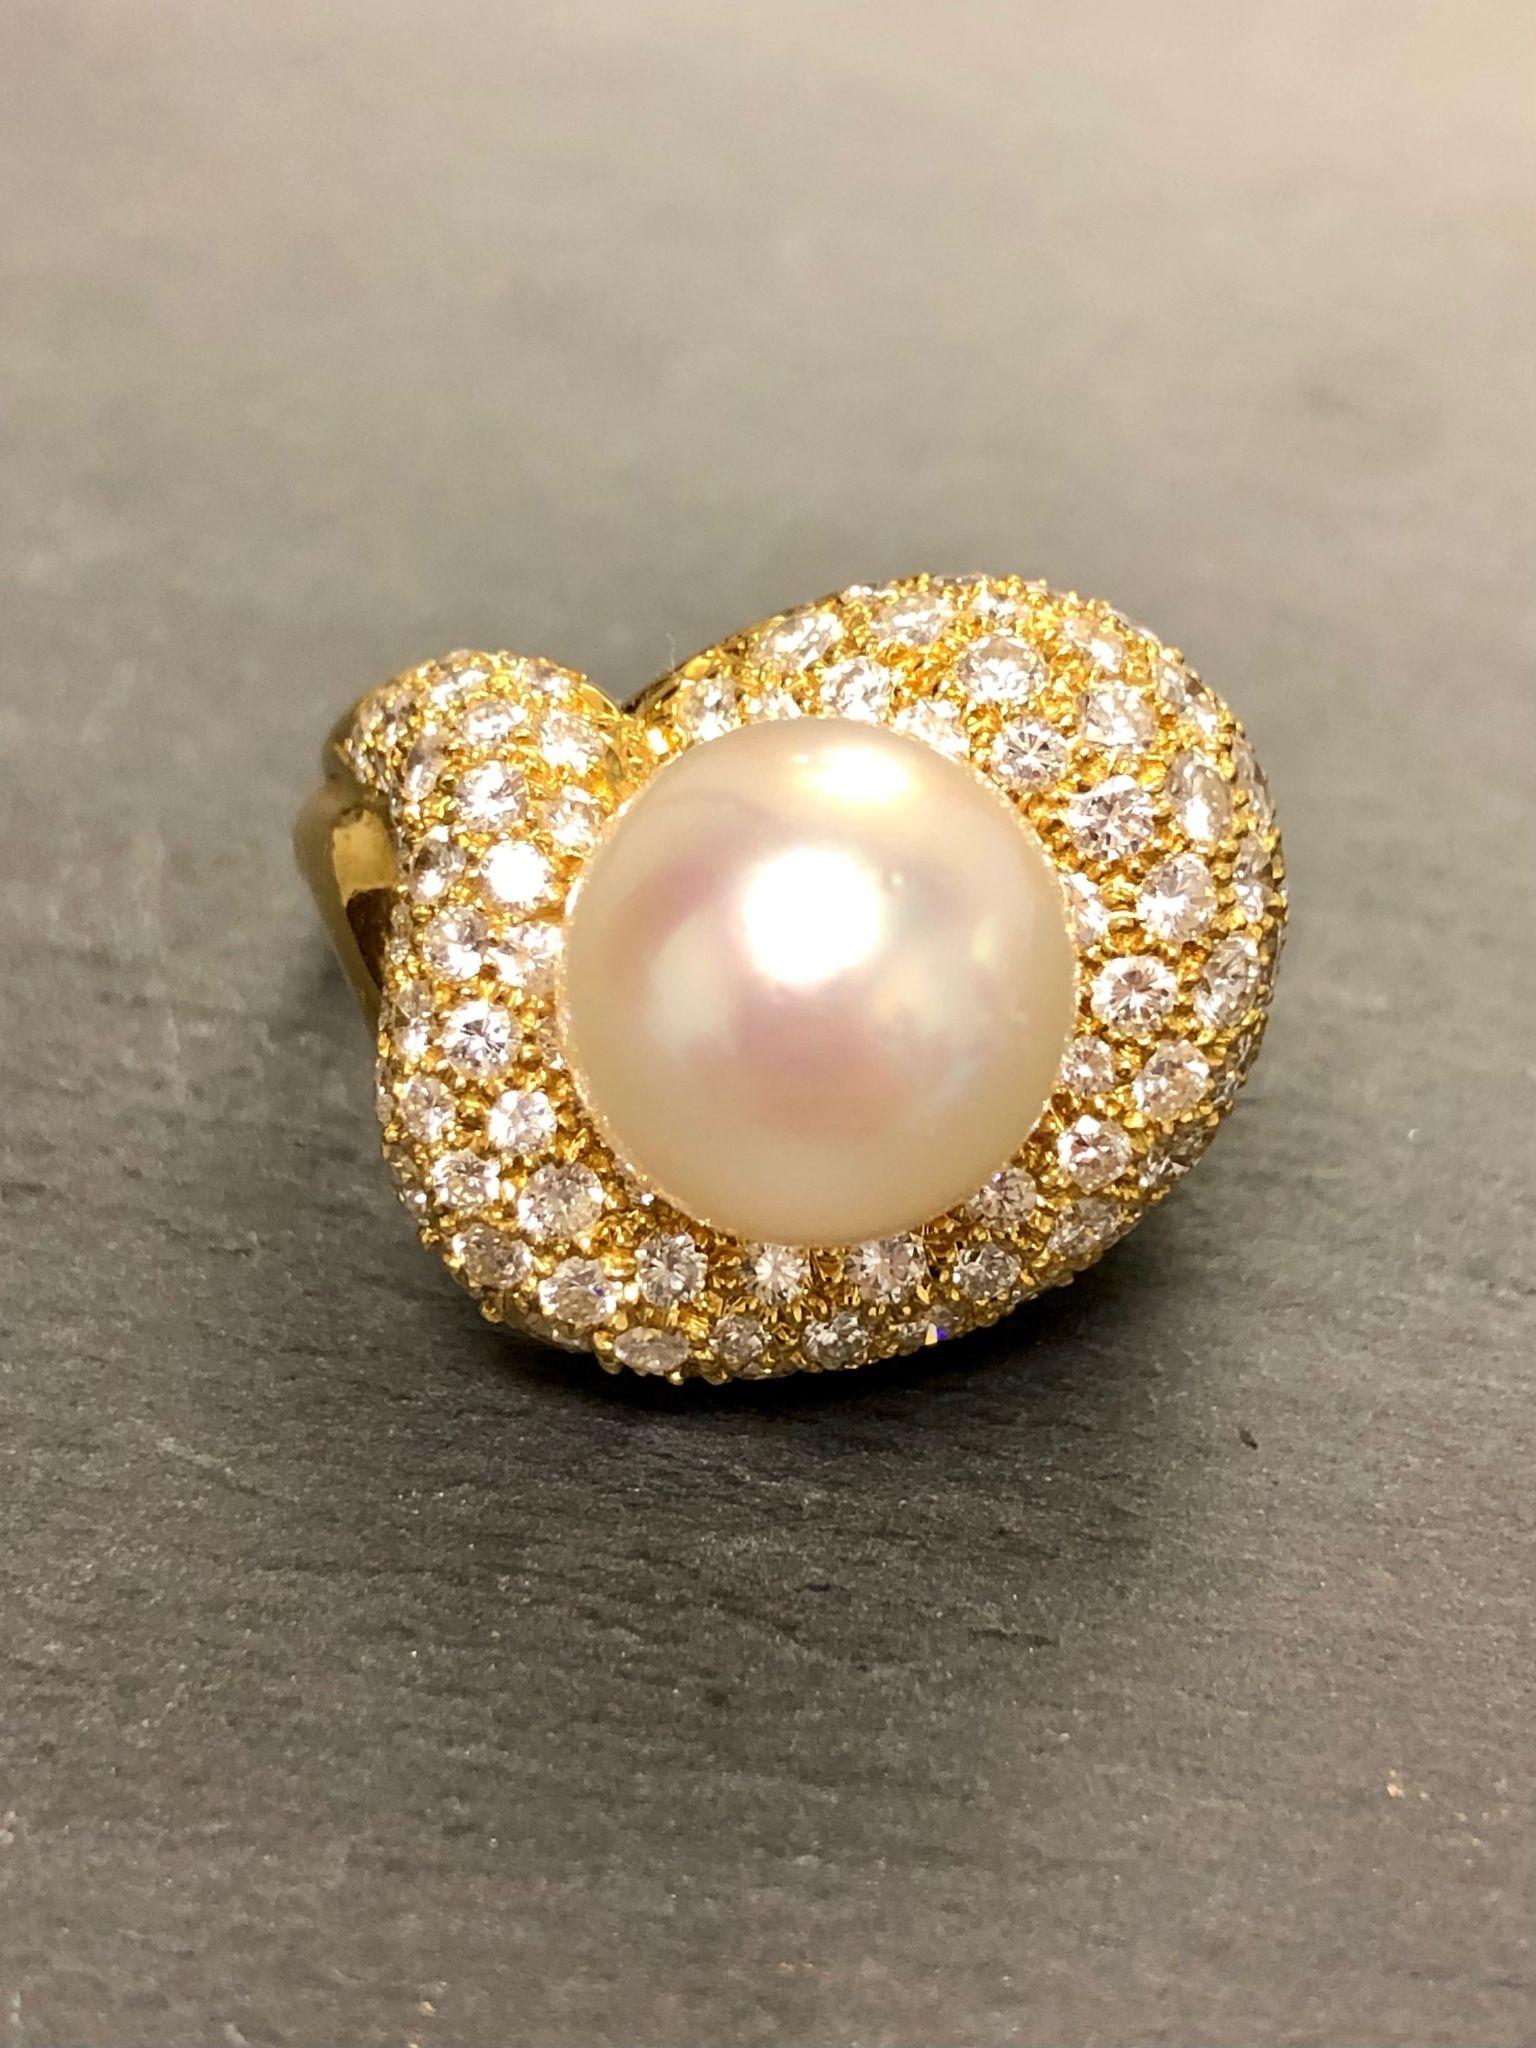 18K Jose Hess Diamond South Sea Pearl Cocktail Ring In Good Condition For Sale In Winter Springs, FL